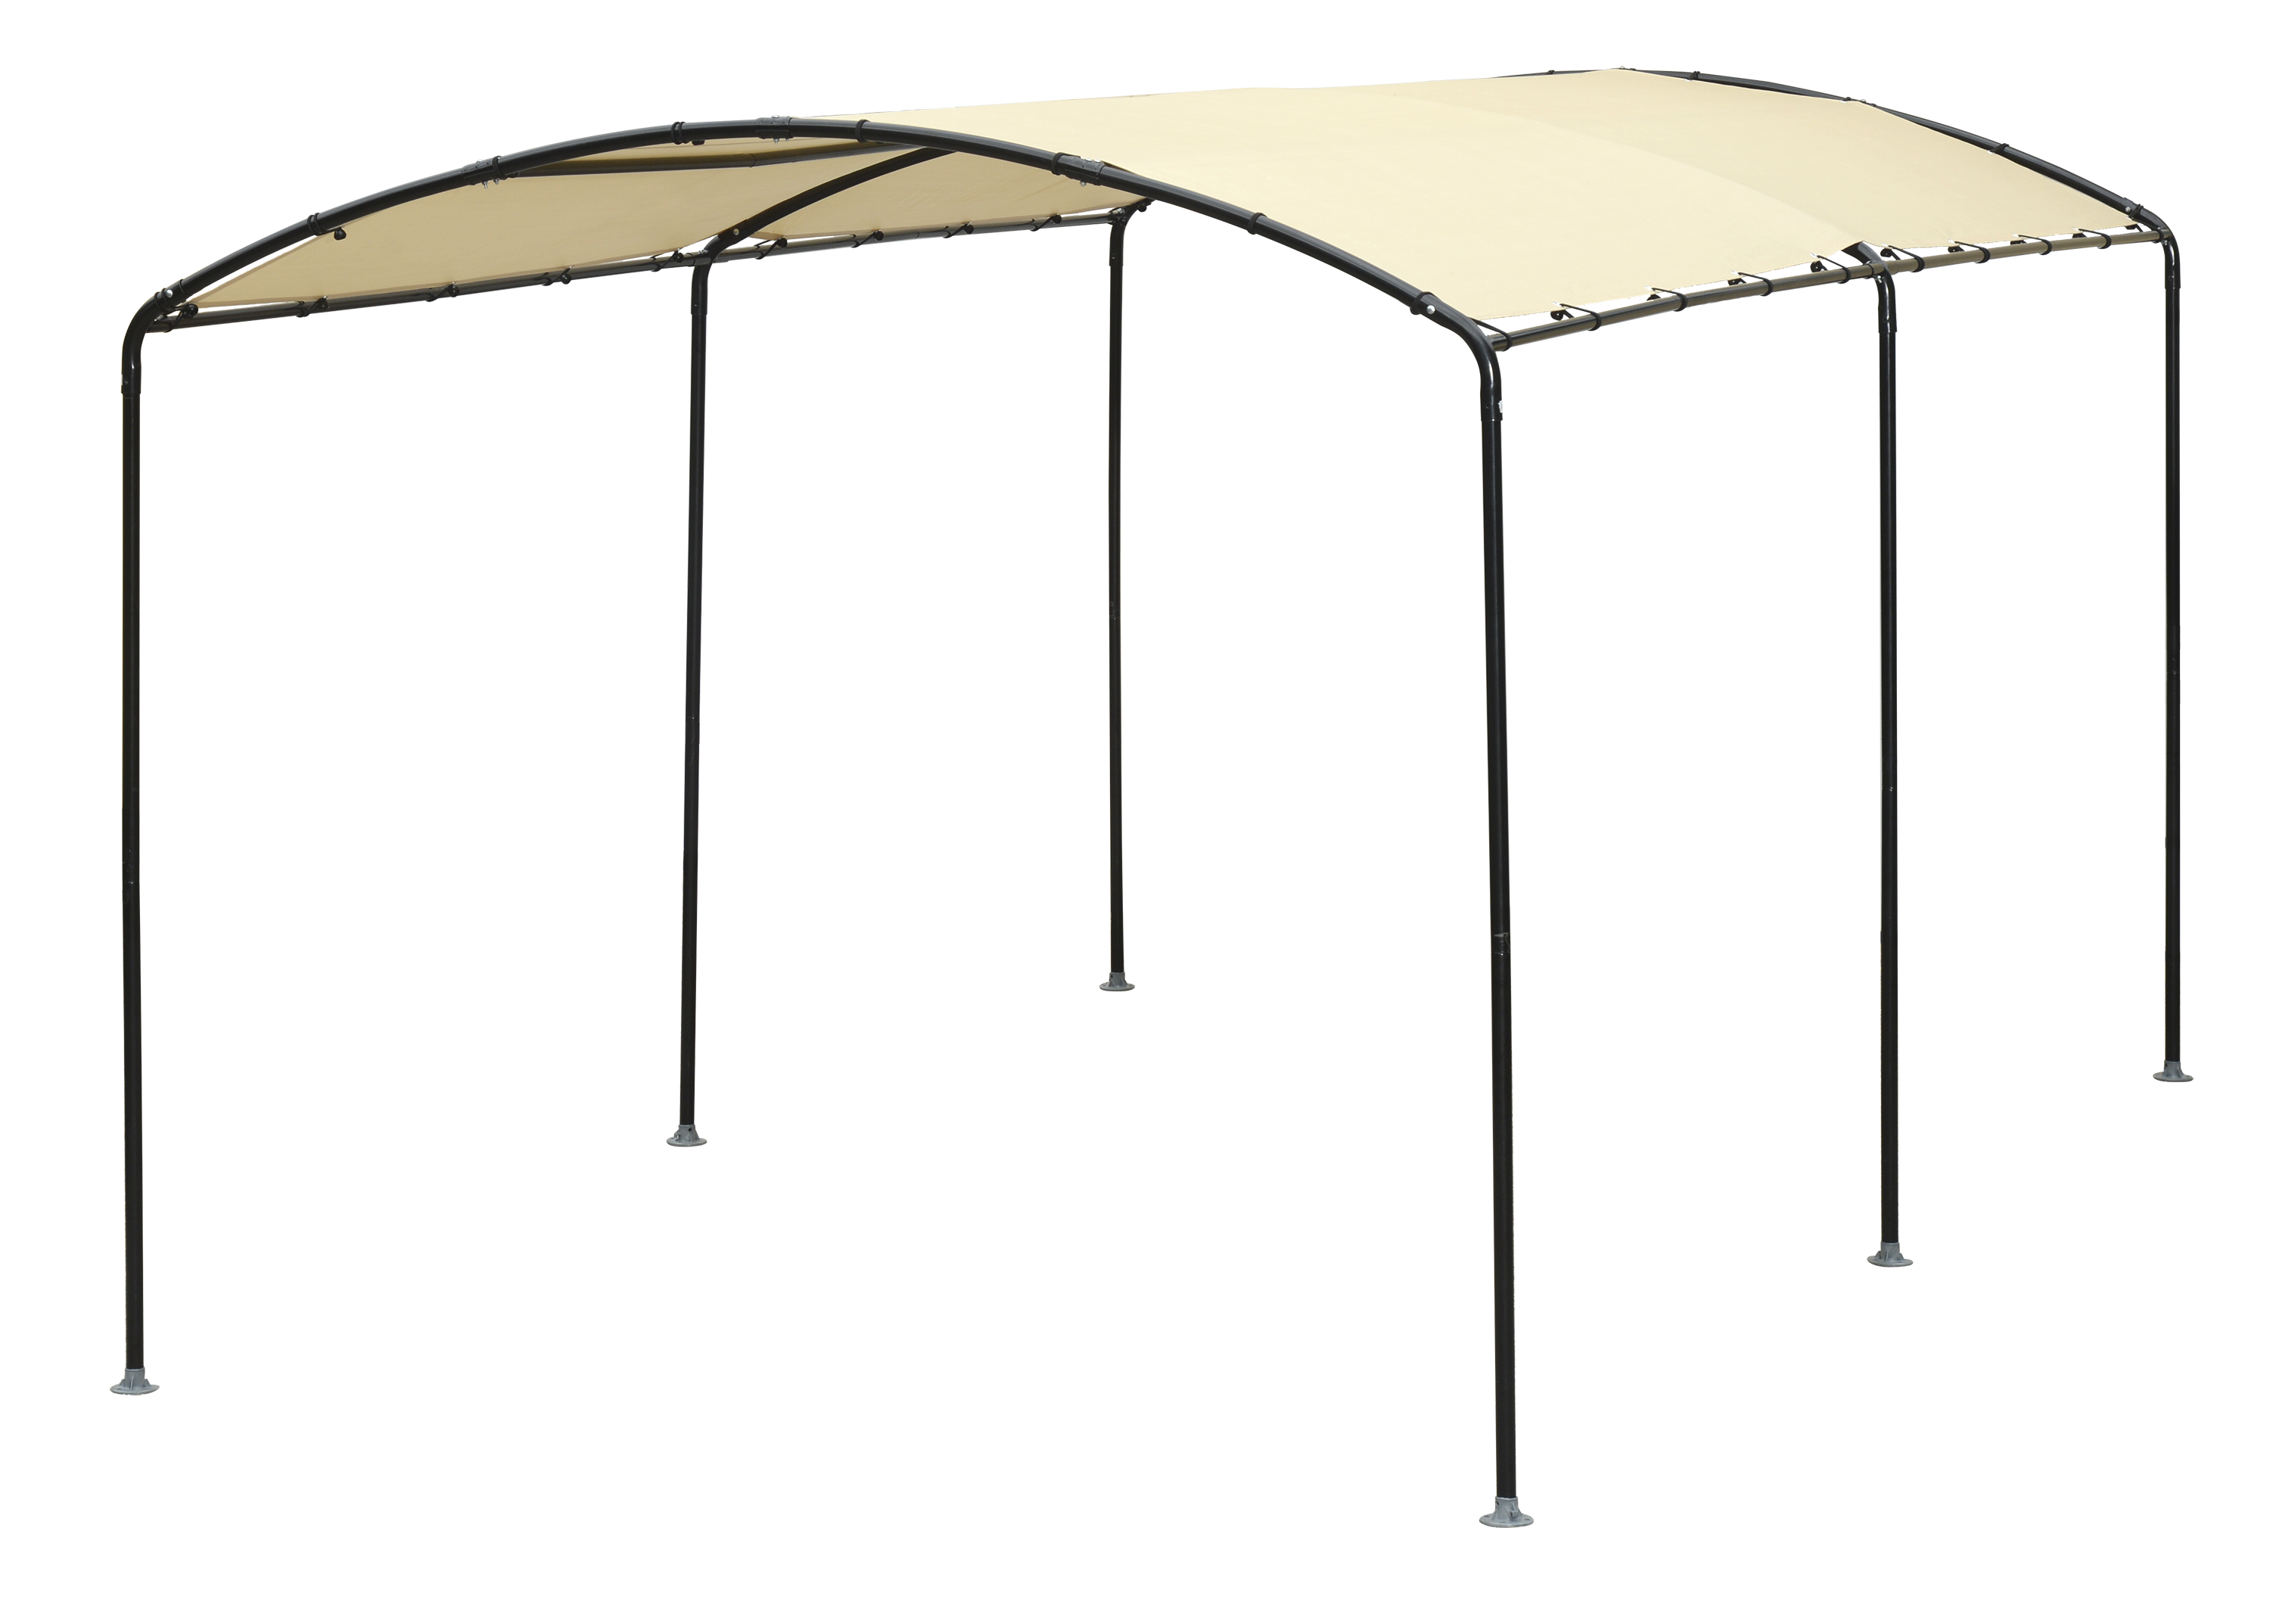 monarc-canopy-canopies-at-lowes